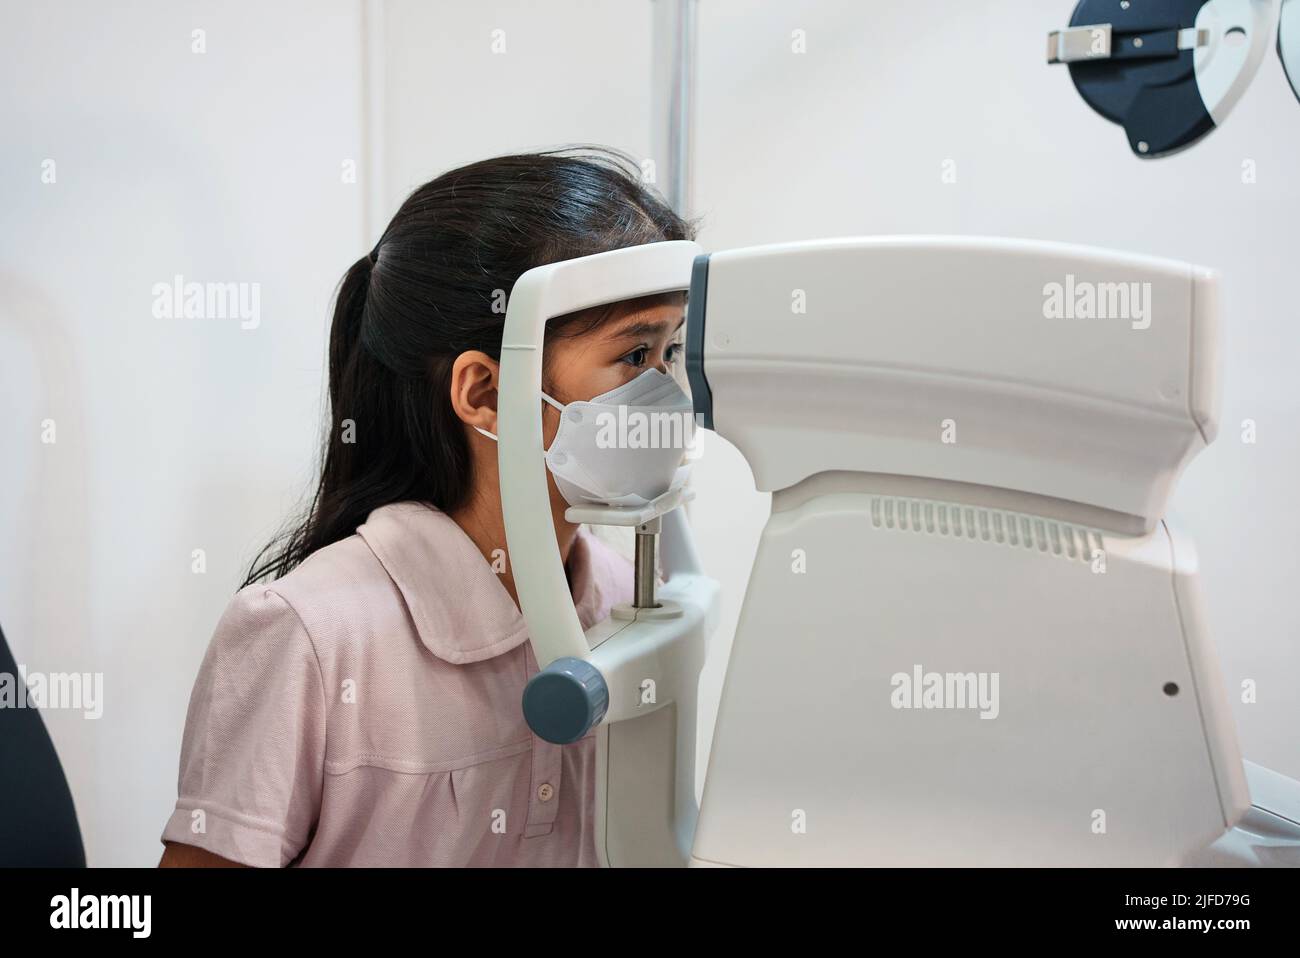 Ophthalmologist examining the eyes of an Asian girl in a clinic. They wear protective face masks. Stock Photo